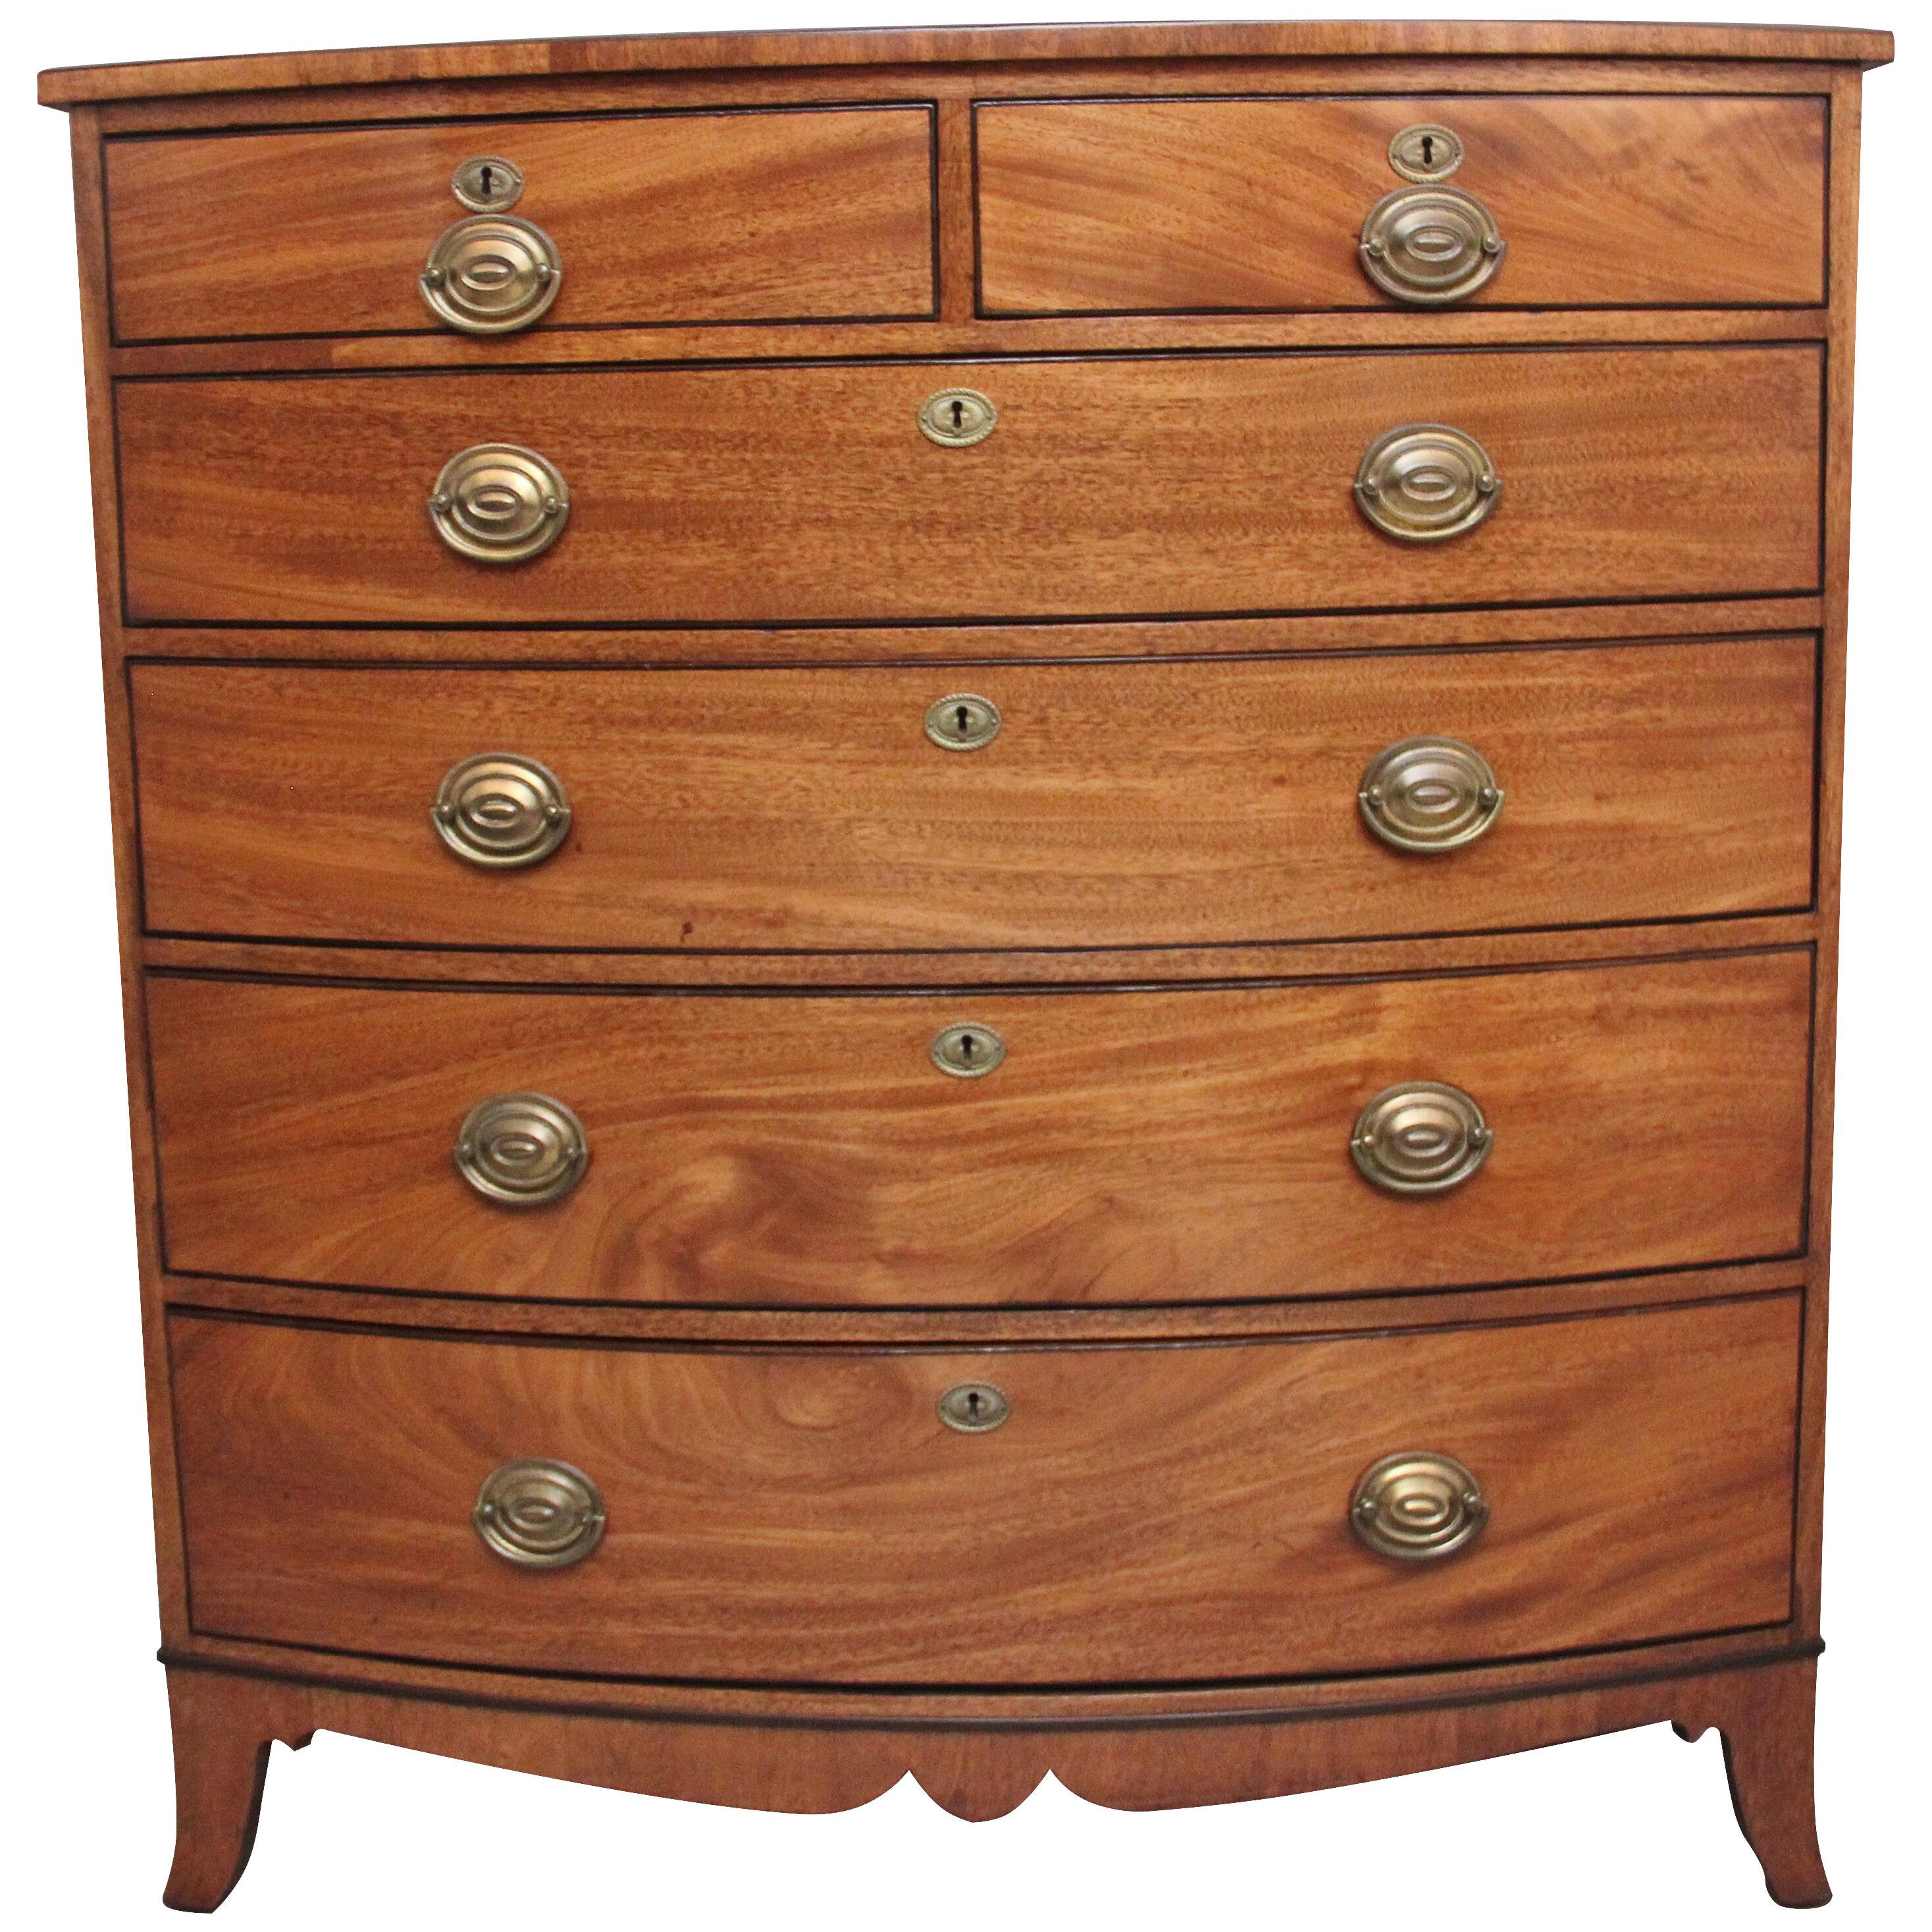 A superb quality Early 19th Century tall mahogany bowfront chest of drawers